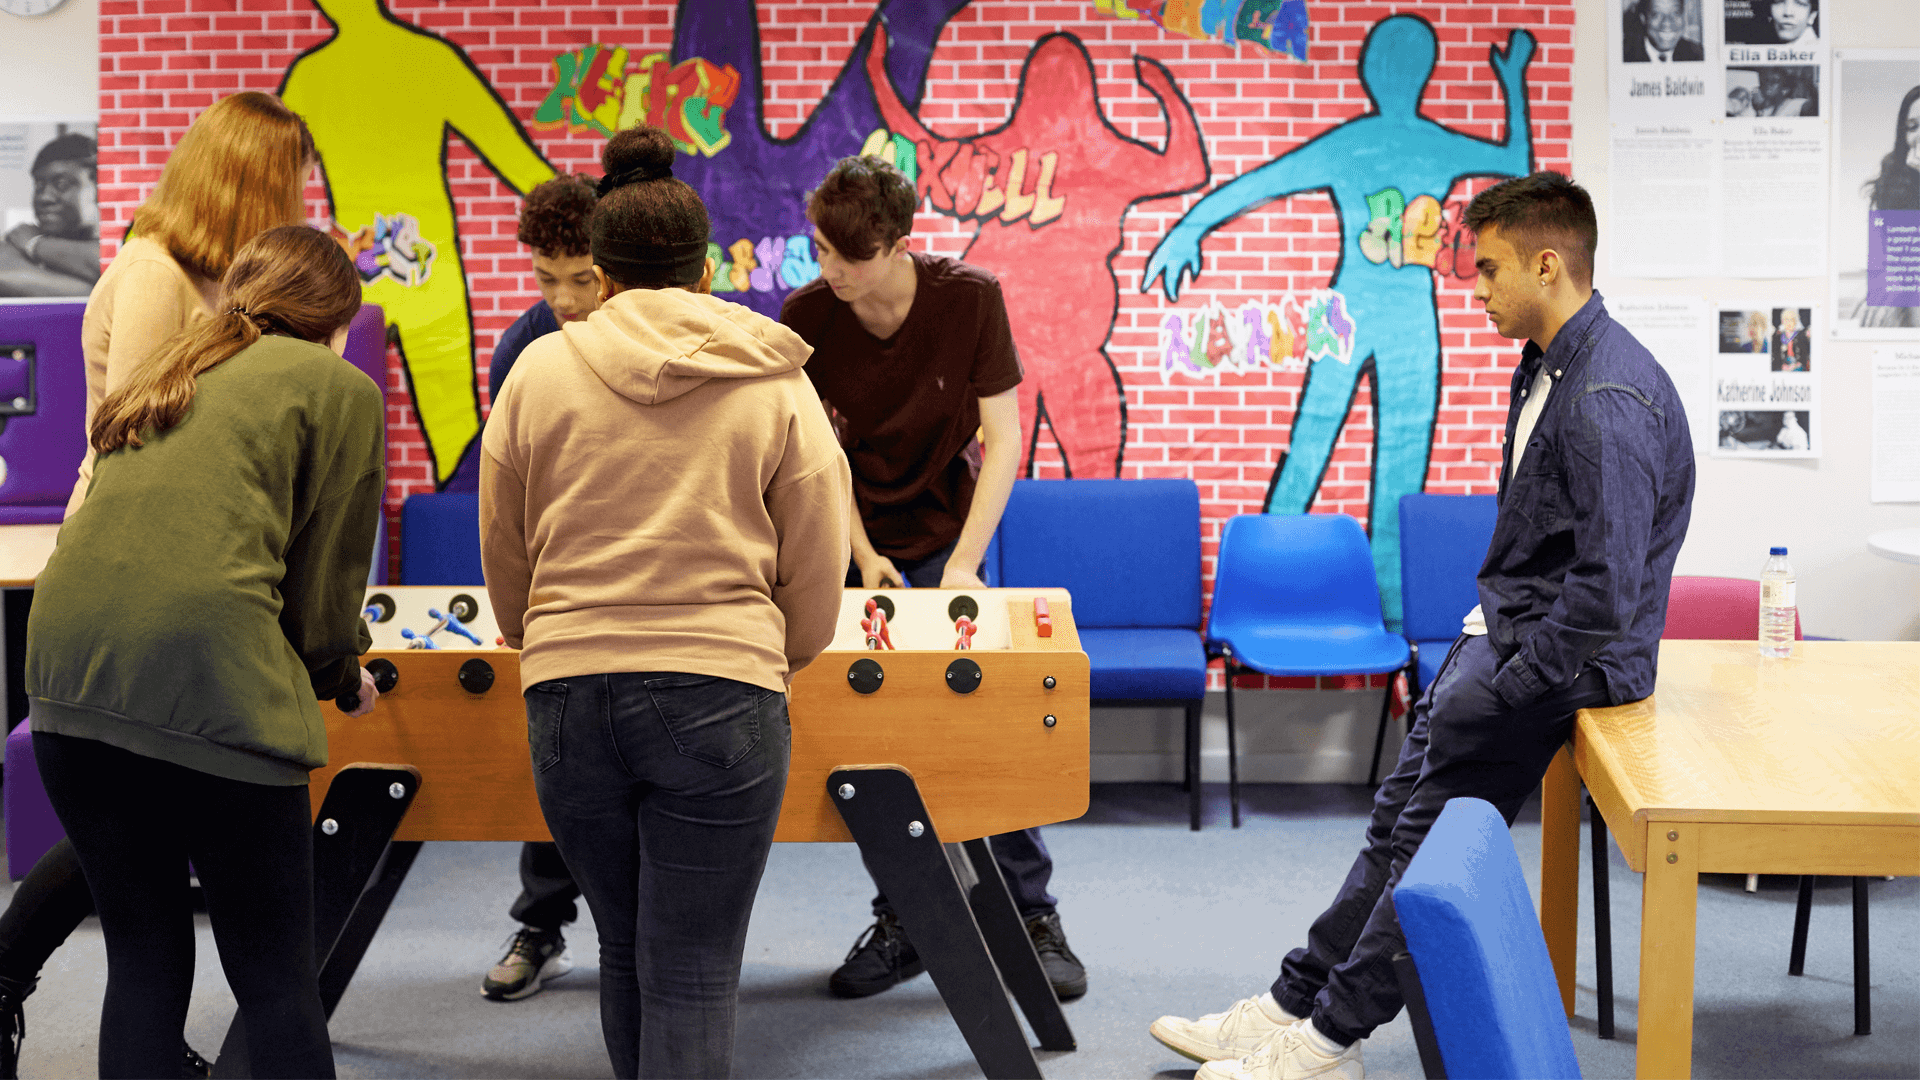 group-of-five-young-people-playing-table-football-while-one-boy-is-on-another-table-watching-with-graffiti-wall-on-background